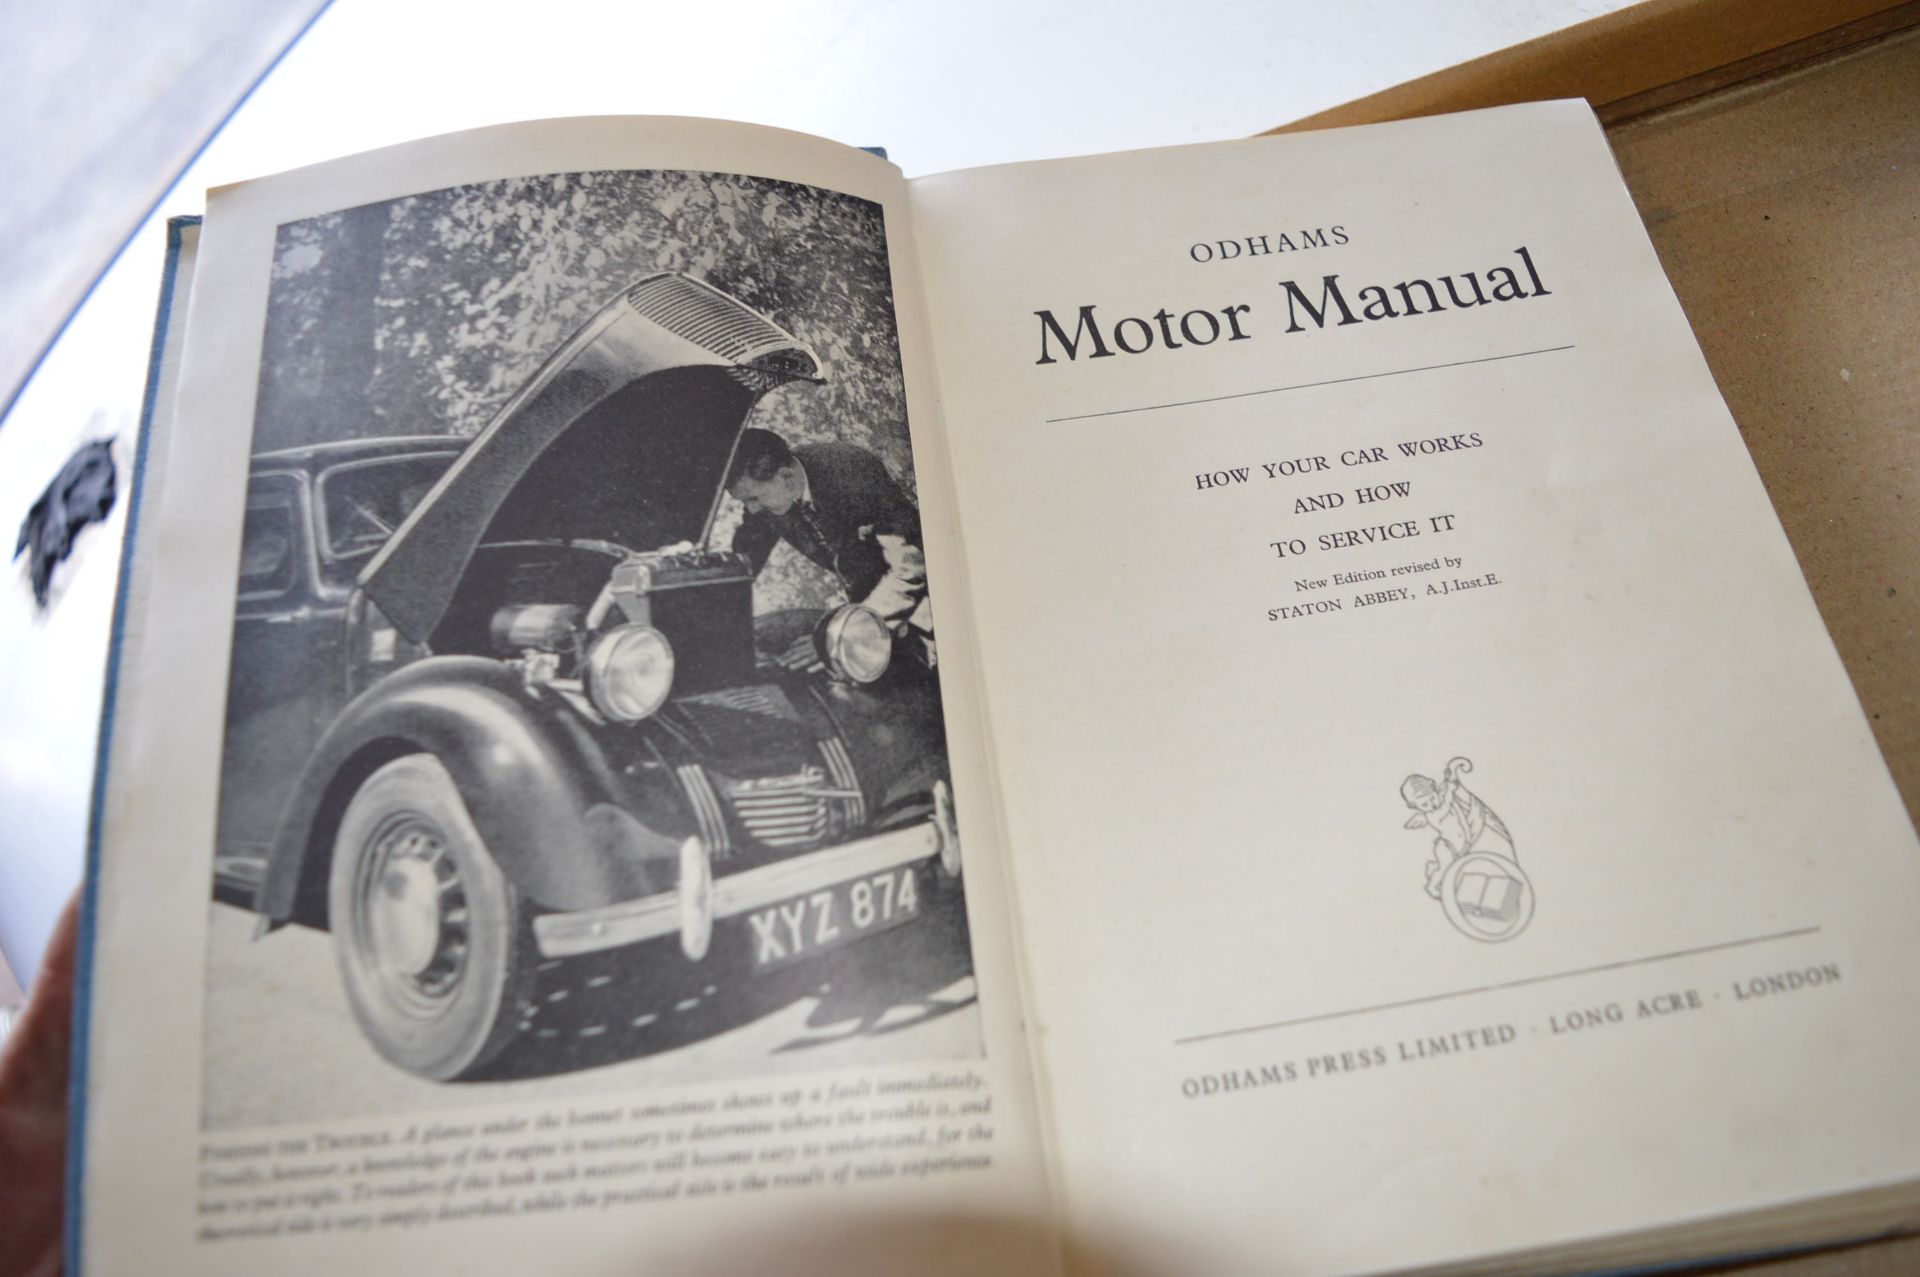 Three Old Books Including The Modern Motor Engineer Vol 1¸ Durhams Motor Manual, and Universal - Image 3 of 5